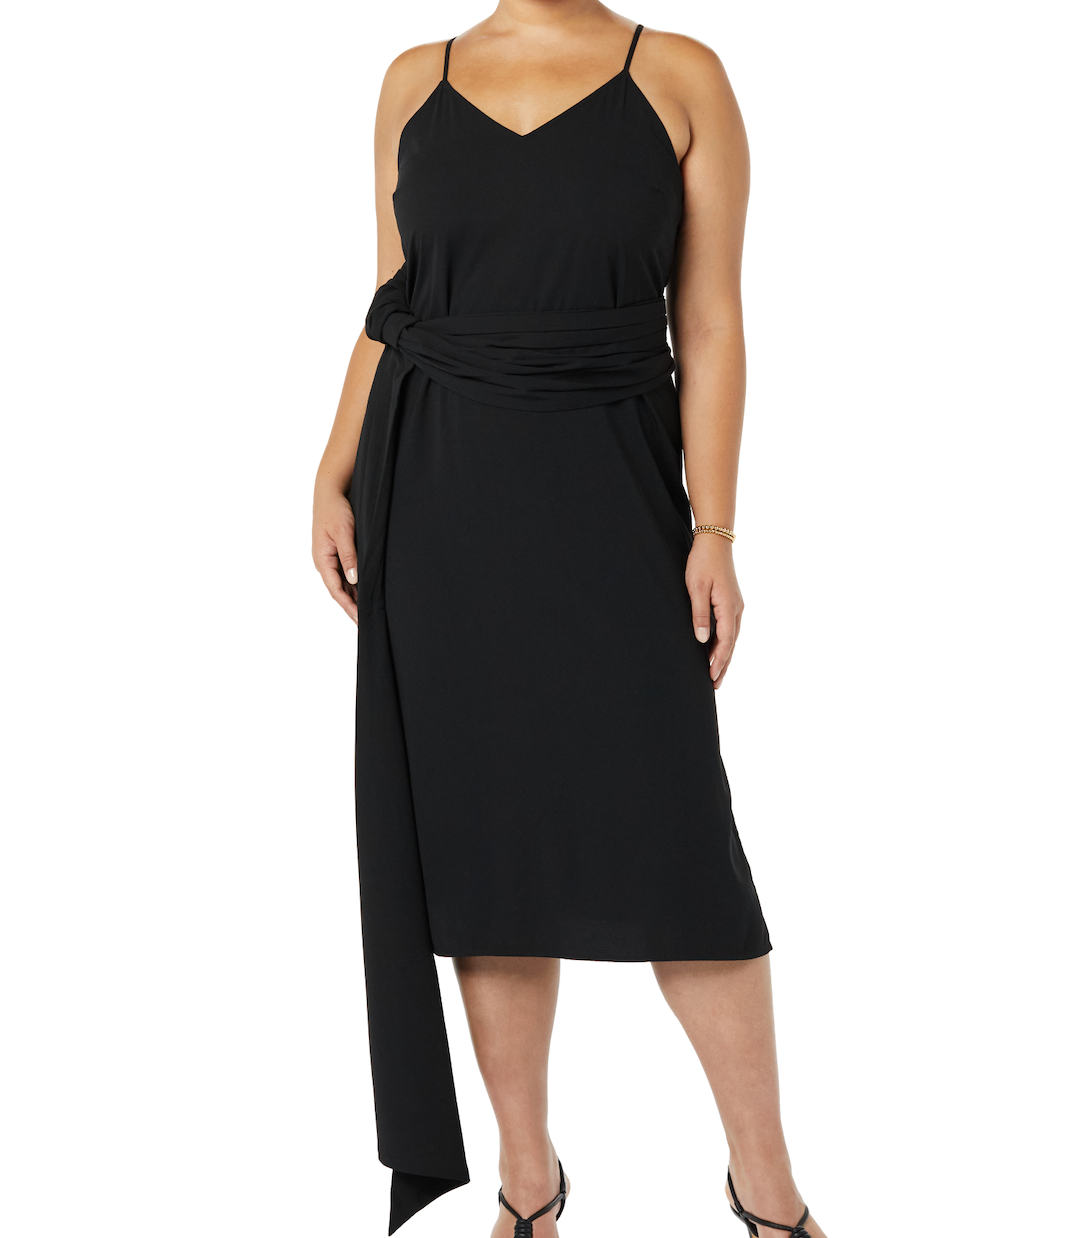 Crepe Sash Wrapped Midi Dress Inspired by Jeanette's Winning Look